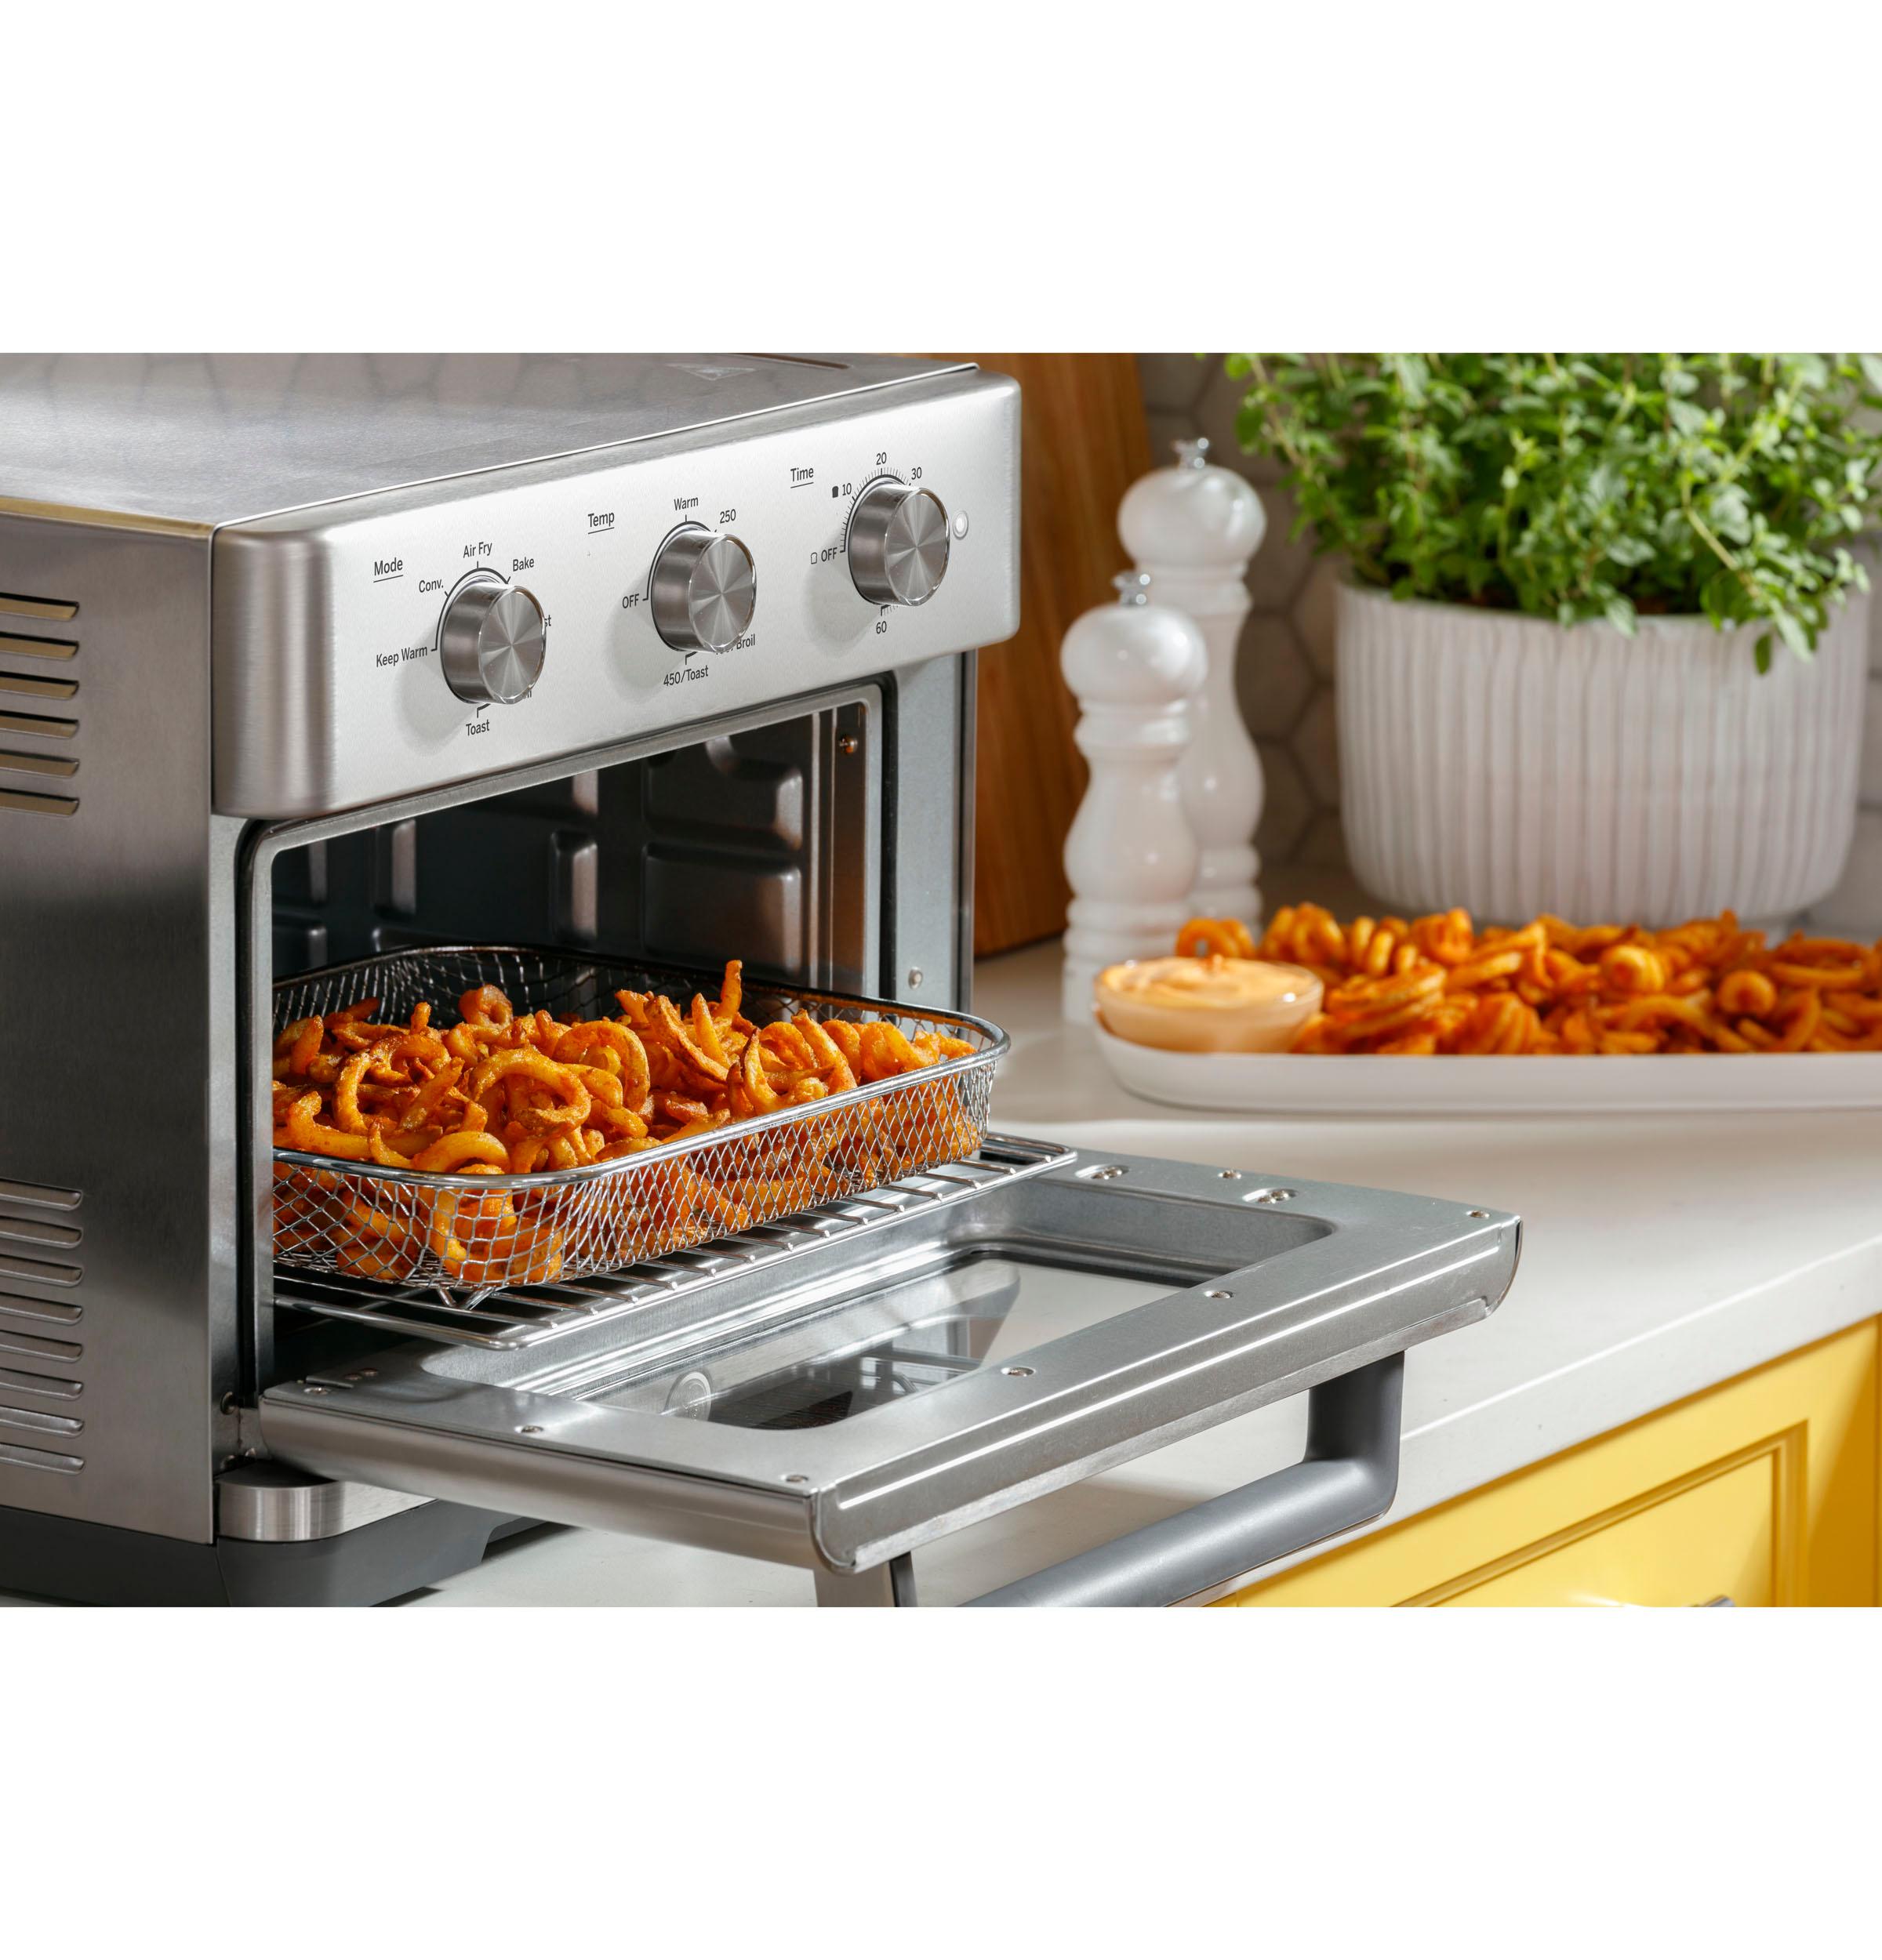 GE Mechanical Air Fry 7-in-1 Toaster Oven